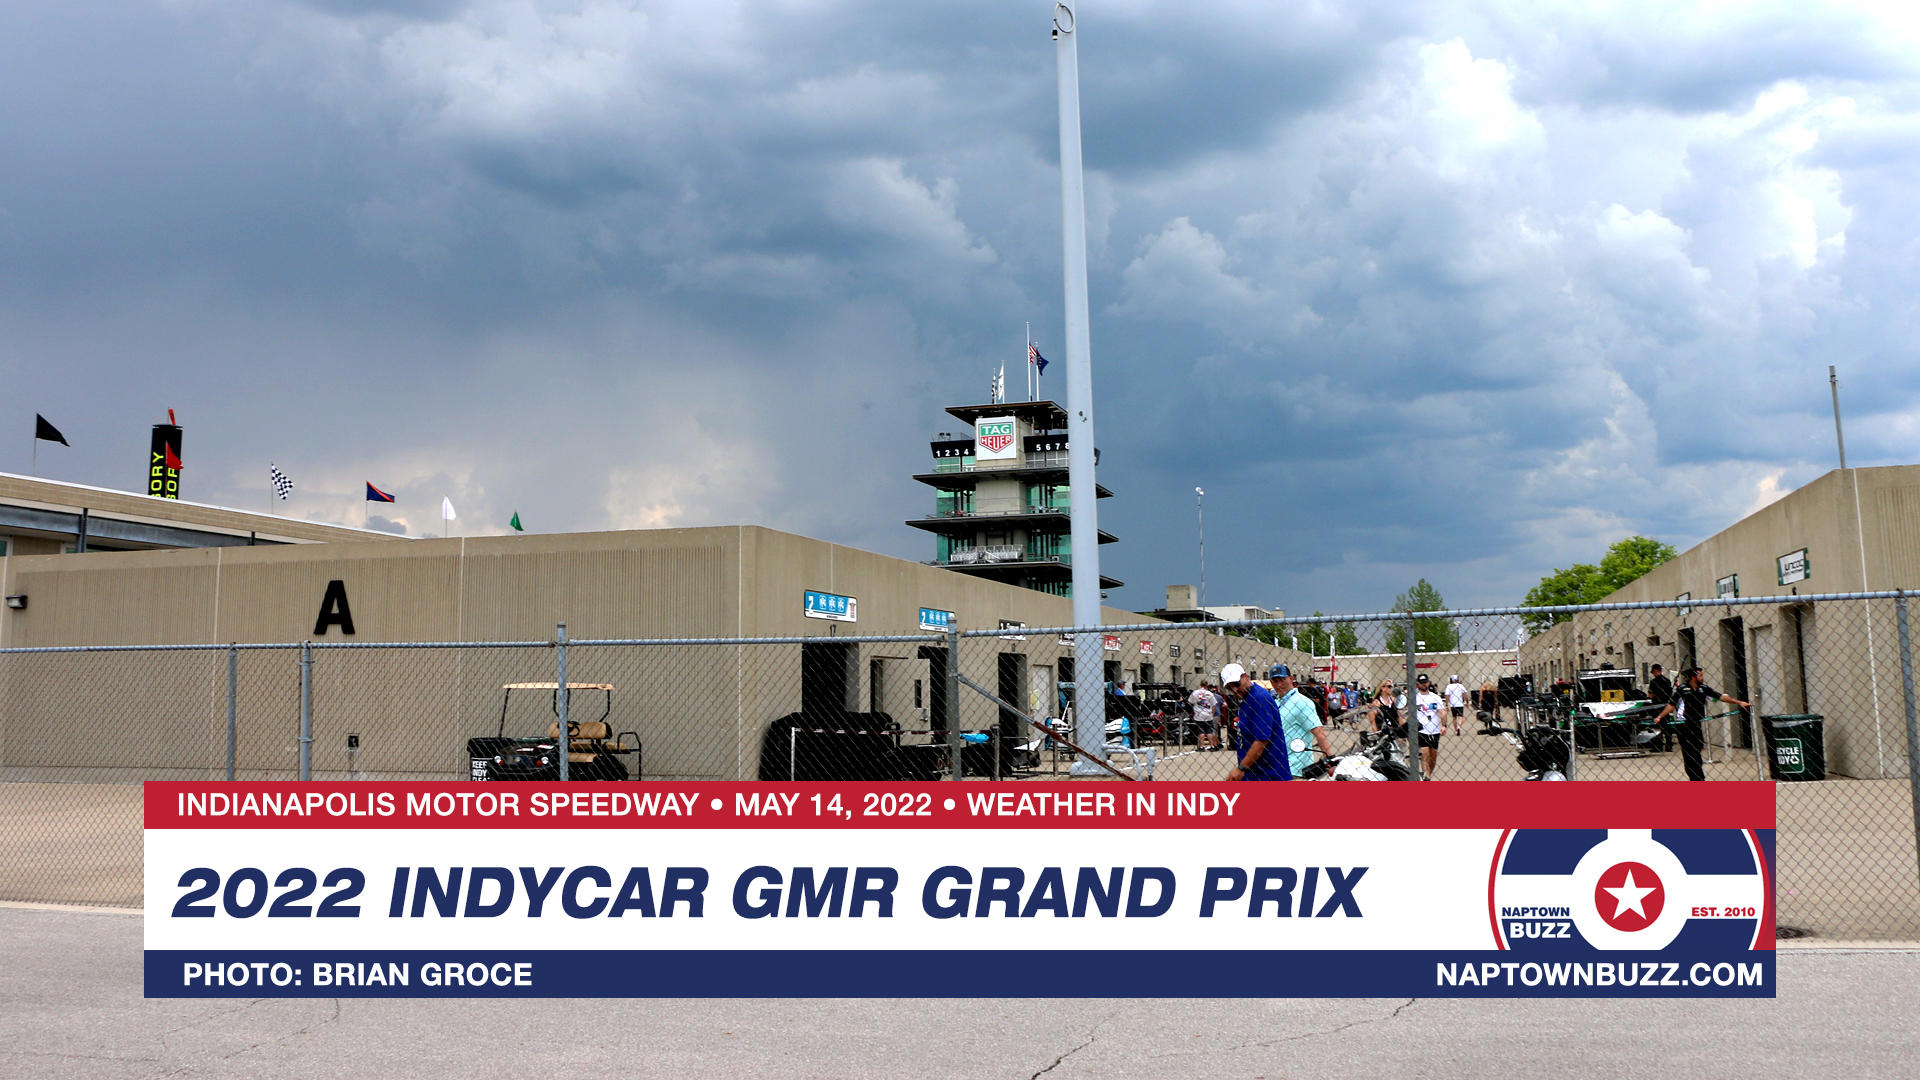 Indy Car Grand Prix Race Day, May 14, 2022